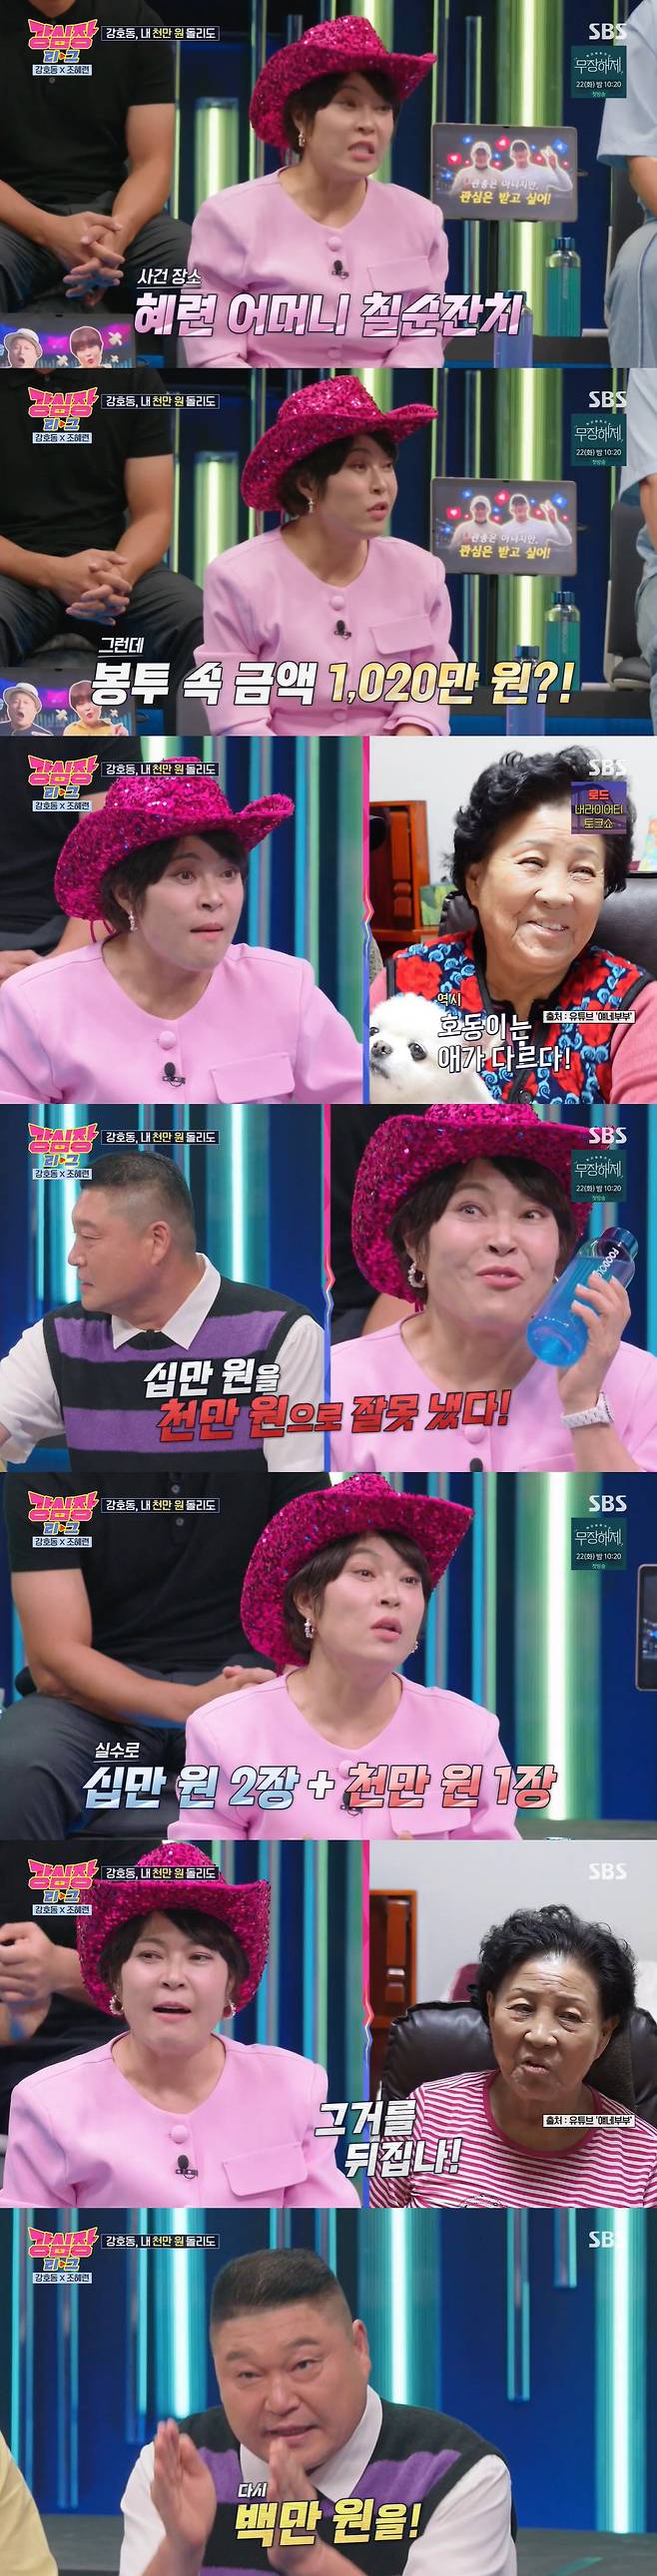 Strong Heart UEFA Champions League Joehye-ryeon told her mother Septuagesima that Kang Ho-dong received 10 million won.In SBS Strong Heart UEFA Champions League broadcasted on the 15th, Joehyeon-ryeon wondered with a thumbnail called Kang Ho-dong, my 10 million won Dolly Do.On the same day, Johye-ryeon recalled 12 years ago, saying, I did this on the show. Today is the first time Ive seen Kang Ho-dong.I left it to my brother-in-law, but I was in a frenzy. Ho-dong! He said, I thought, What is Ho-dong!Johye-ryeon said, When I opened Envelope, it contained 10.2 million won. Something was strange. My mother praised it as Ho-dong!Im sorry, but I made a mistake of 100,000 won to 10 million won. I tried to send 300,000 won, but I put 10 million won wrong and sent 10 million won.Johye-ryeon said, Im worth 300,000 won to Ho-dong! and added, It was reduced from 10.2 million won to 300,000 won. Since the main character is my mother, I talked to my mother and she said, When I wrestle, I flip over and flip over.Johye-ryeon said, I gave 10 million won. I finally received 200,000 won. Kang Ho-dong said, I was so sorry after receiving 10 million won, so I gave 1 million won to Envelope with gratitude.But hye-ryeon can not Memory Joe-ryeon laughed, saying, I do not have a Memory 